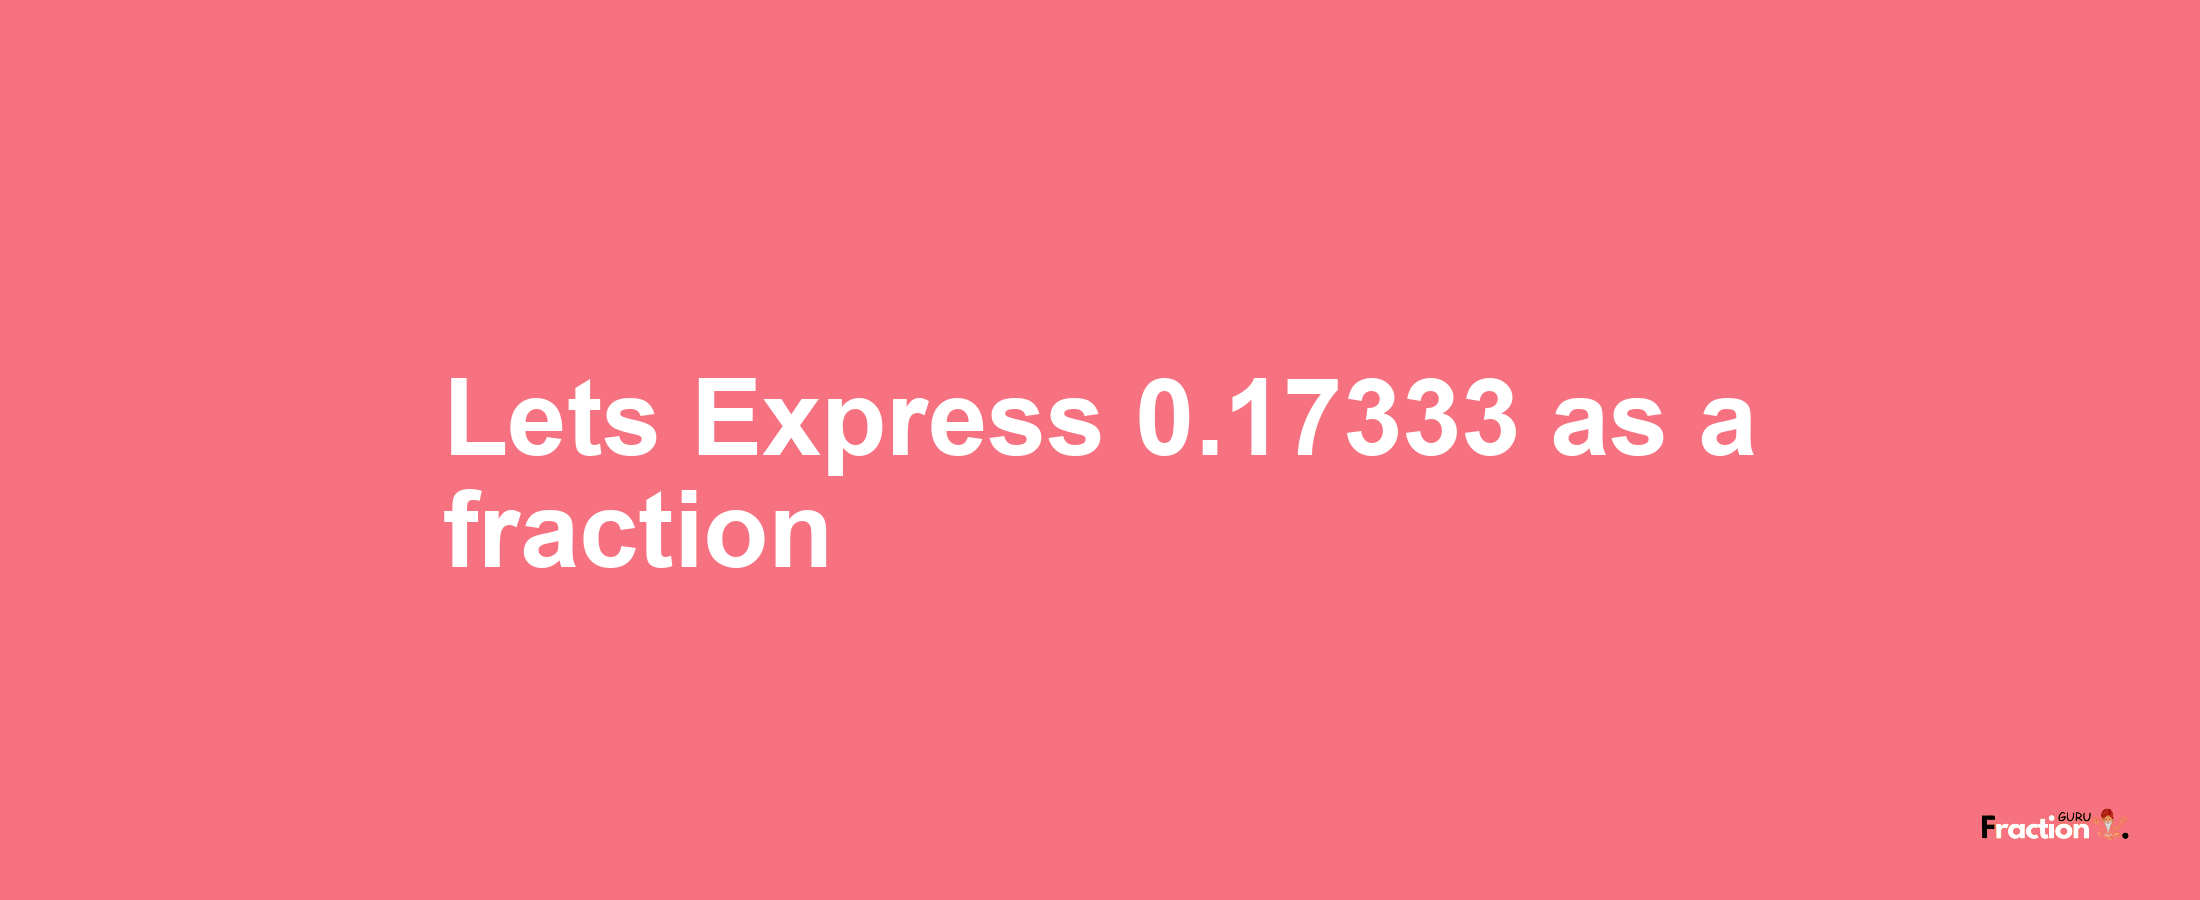 Lets Express 0.17333 as afraction